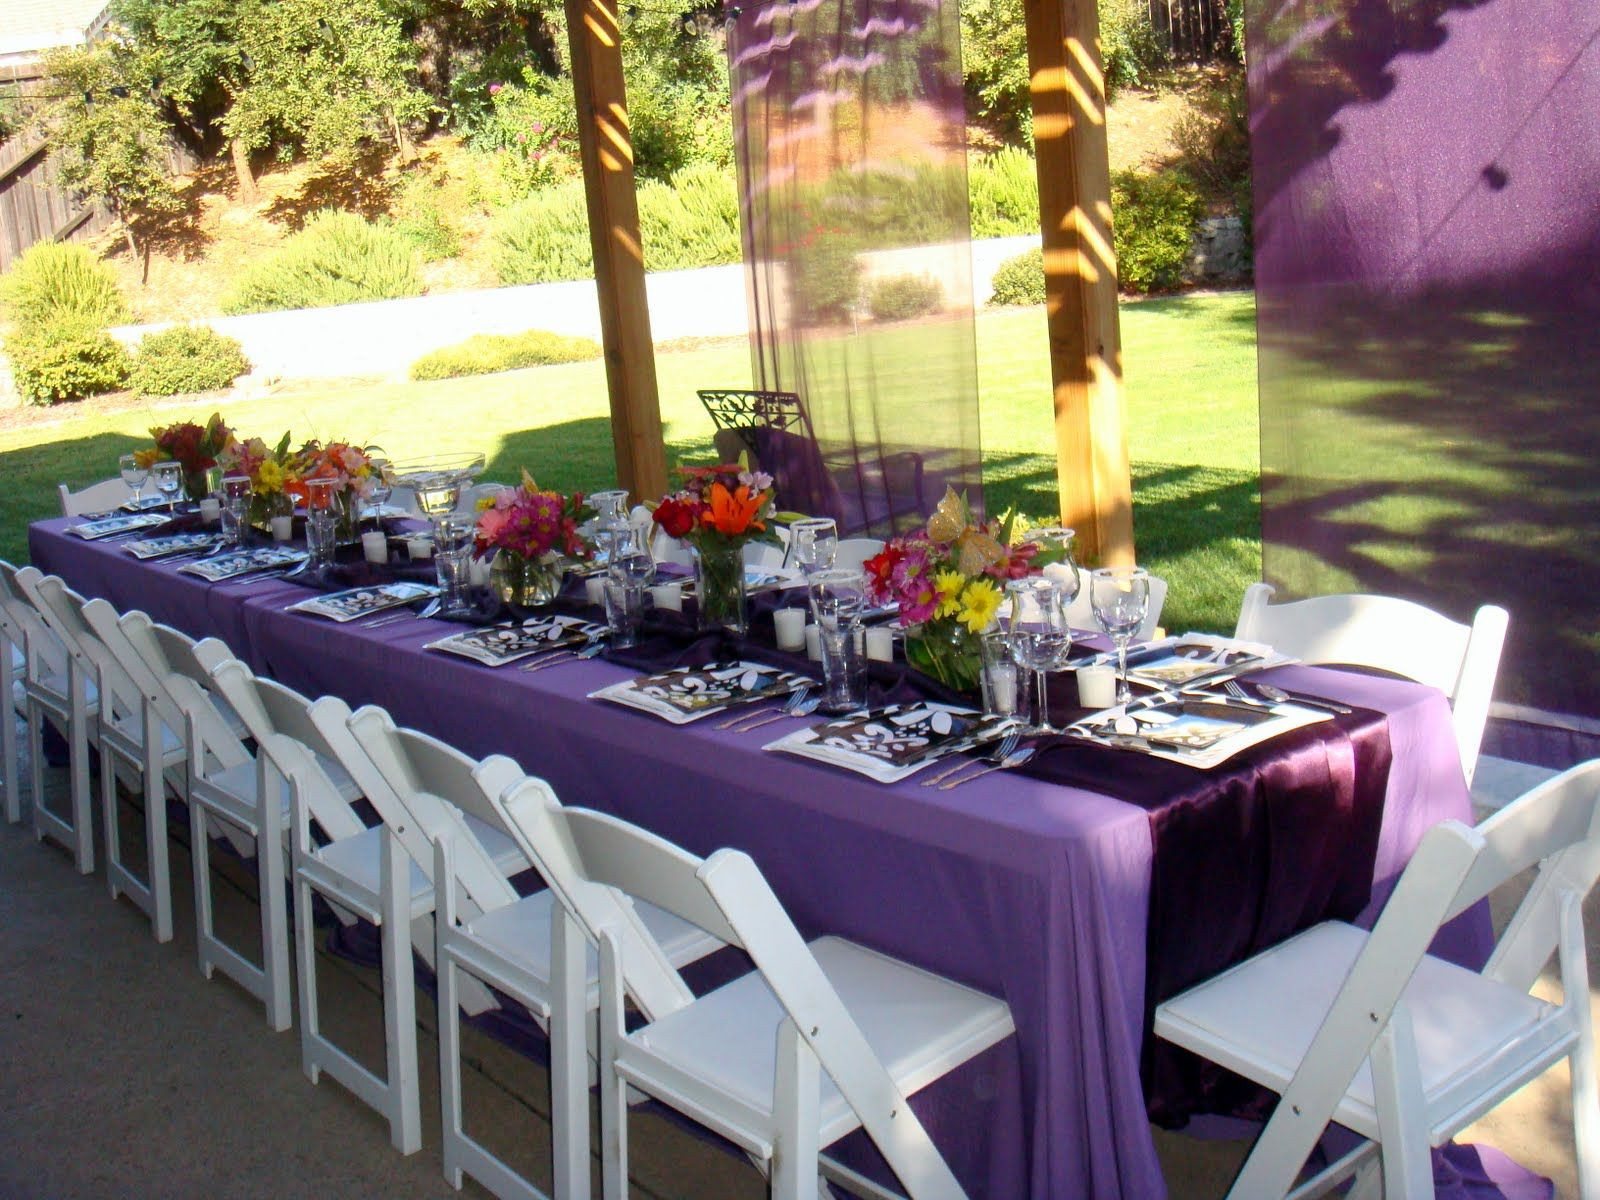 Backyard Graduation Party Decorating Ideas
 tablescapes for outdoor graduation party